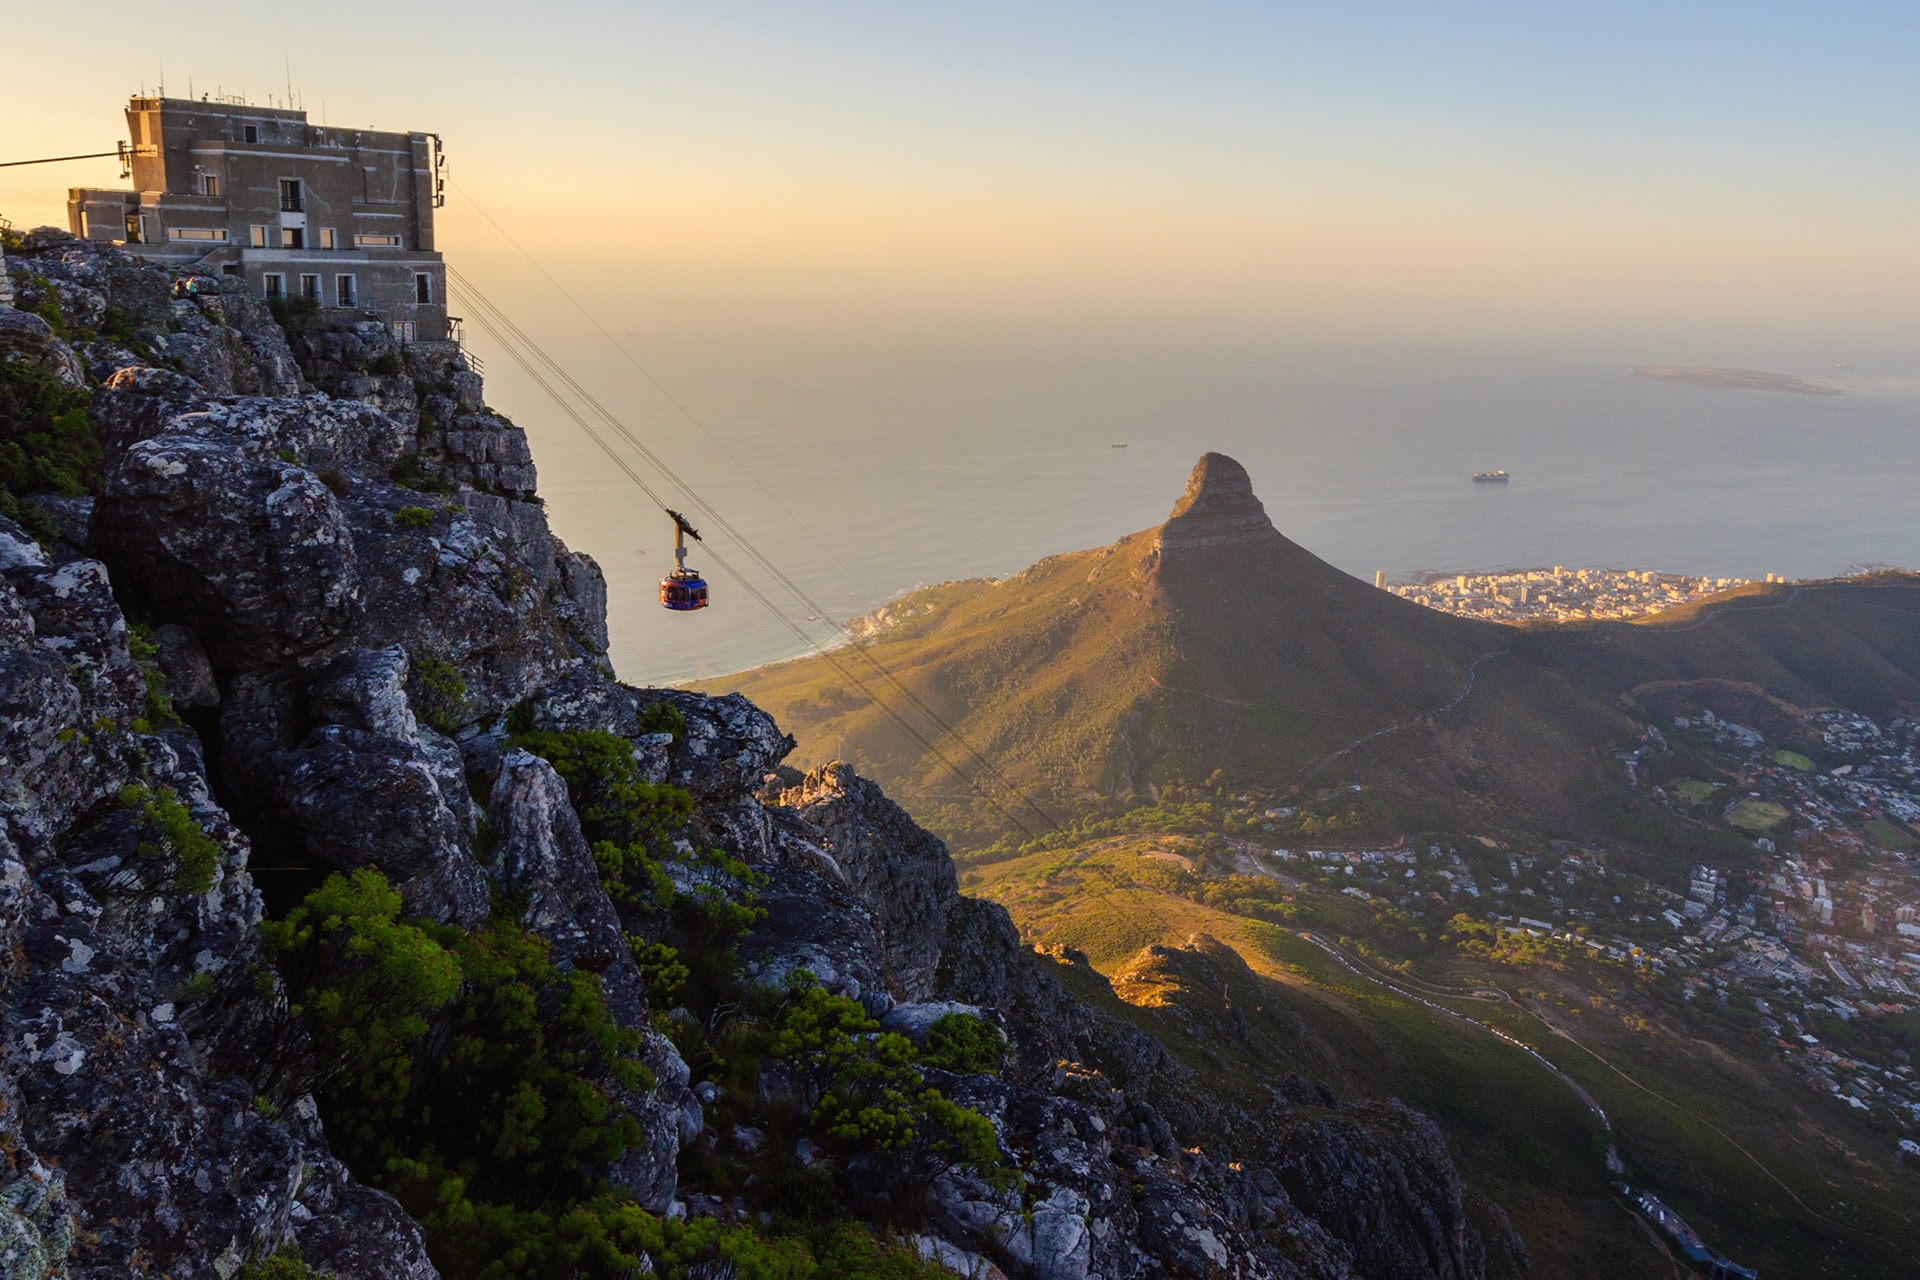 Cable way approaching the peak of Table Mountain in Cape Town, South Africa